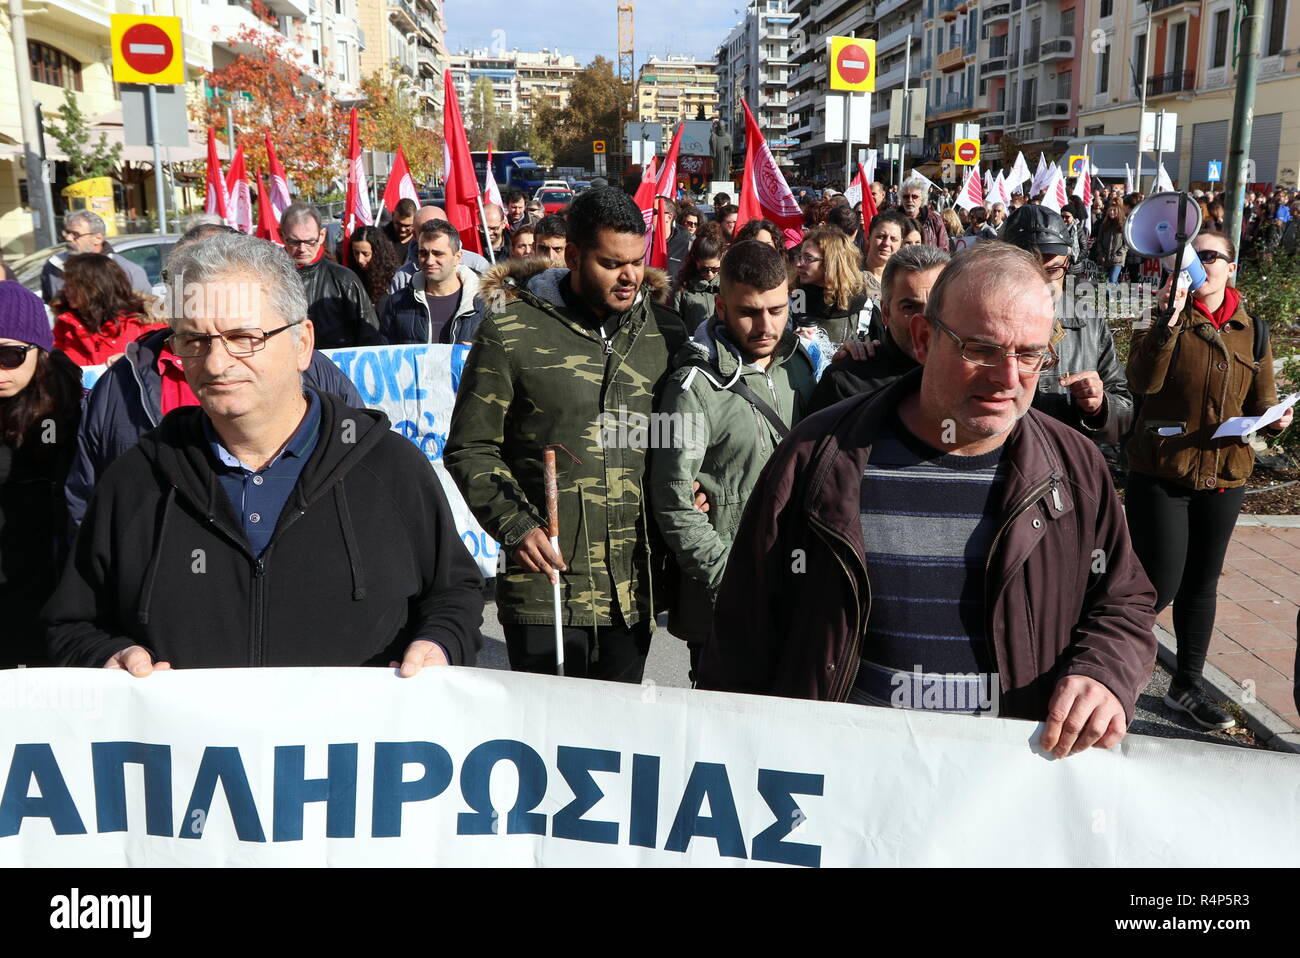 Thessaloniki, Greece, 28th November, 2018. Protesters from the communist-affiliated trade union PAME take part in a demonstration during a 24-hour walkout staged by Greece's largest private sector union GSEE  against planned pension cuts and to demand the reversal of labour reforms implemented under the country's third bailout. The strike by the GSEE union is the second major strike since Greece exited its bailout programme in August. Credit : Orhan Tsolak / Alamy Live News. Stock Photo